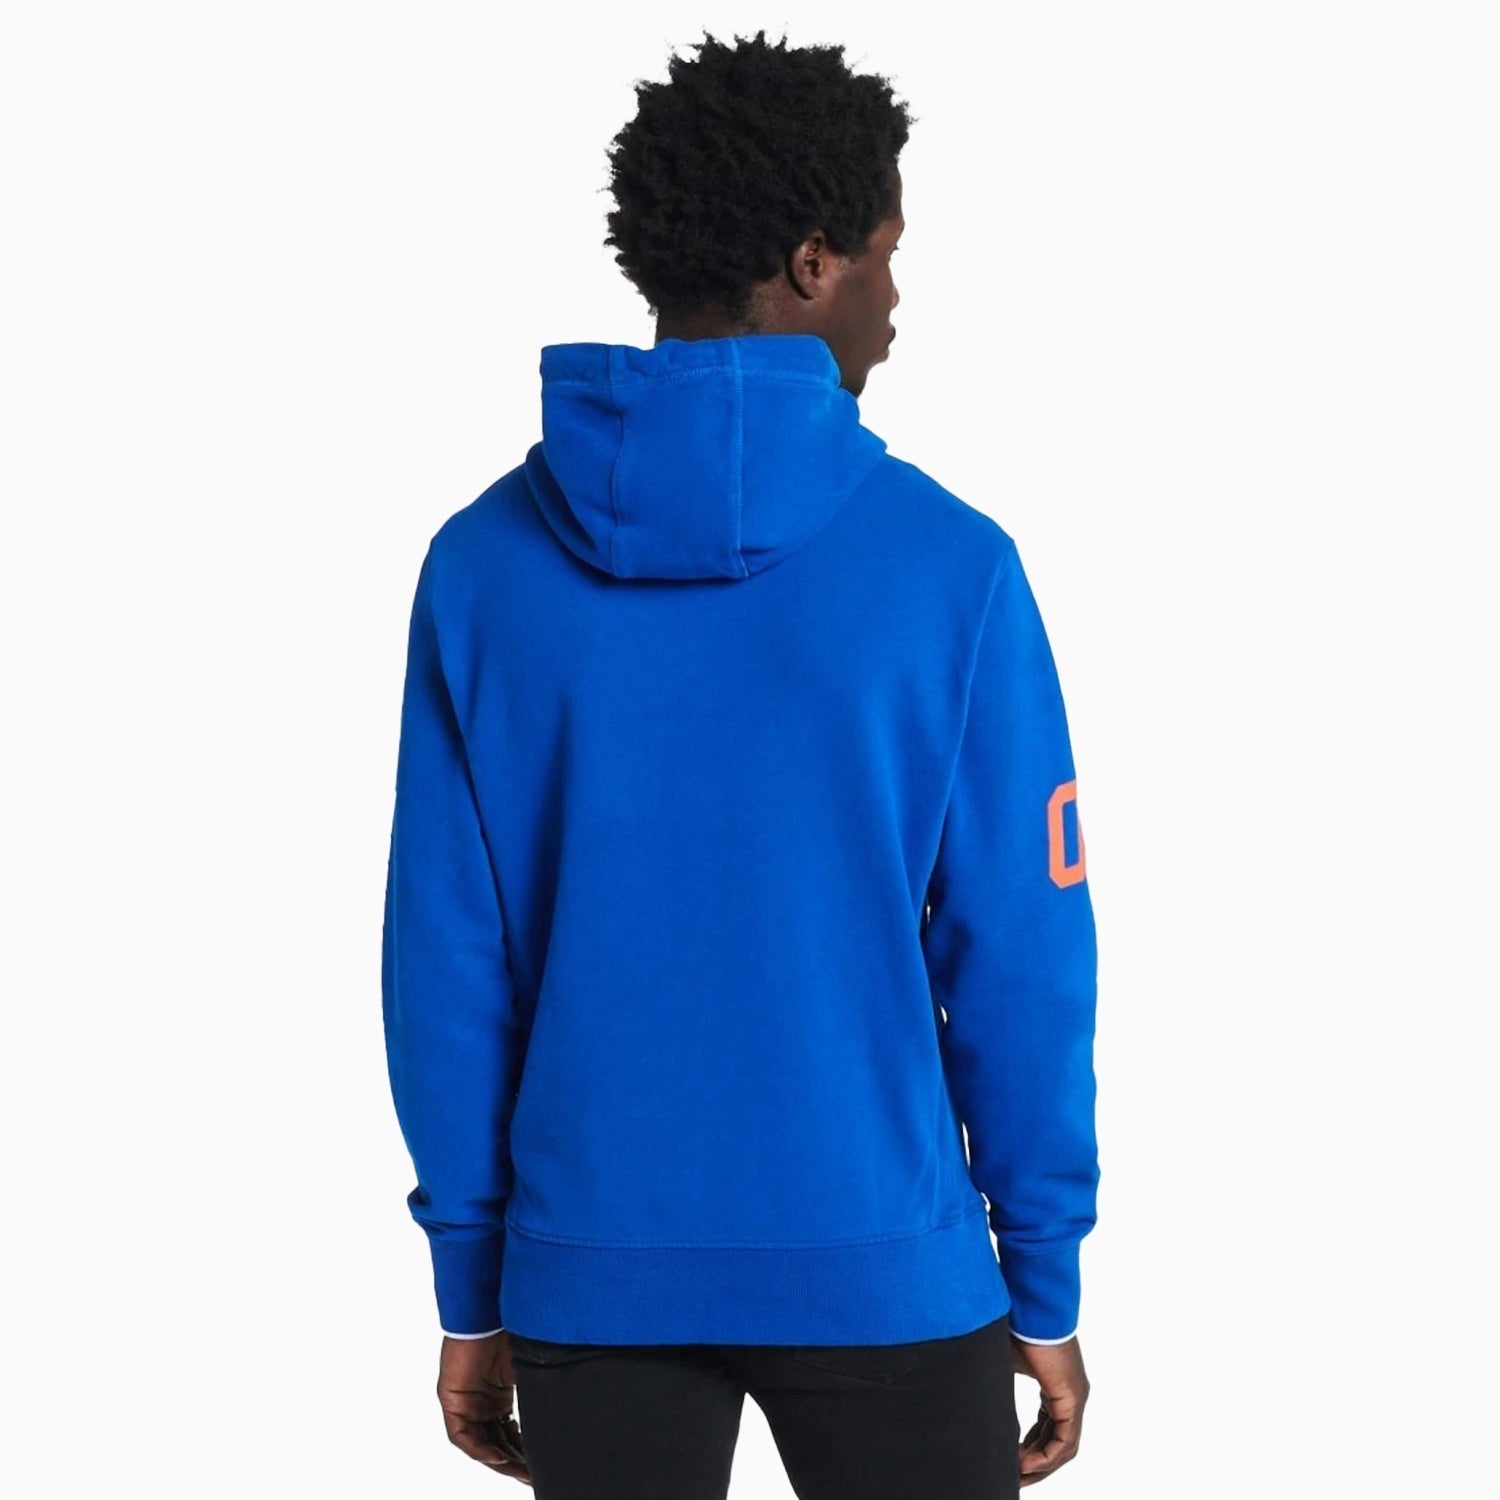 Superdry Men's Superdry Strikeout Hoodie - Color: Royal Blue, White - Tops and Bottoms USA -